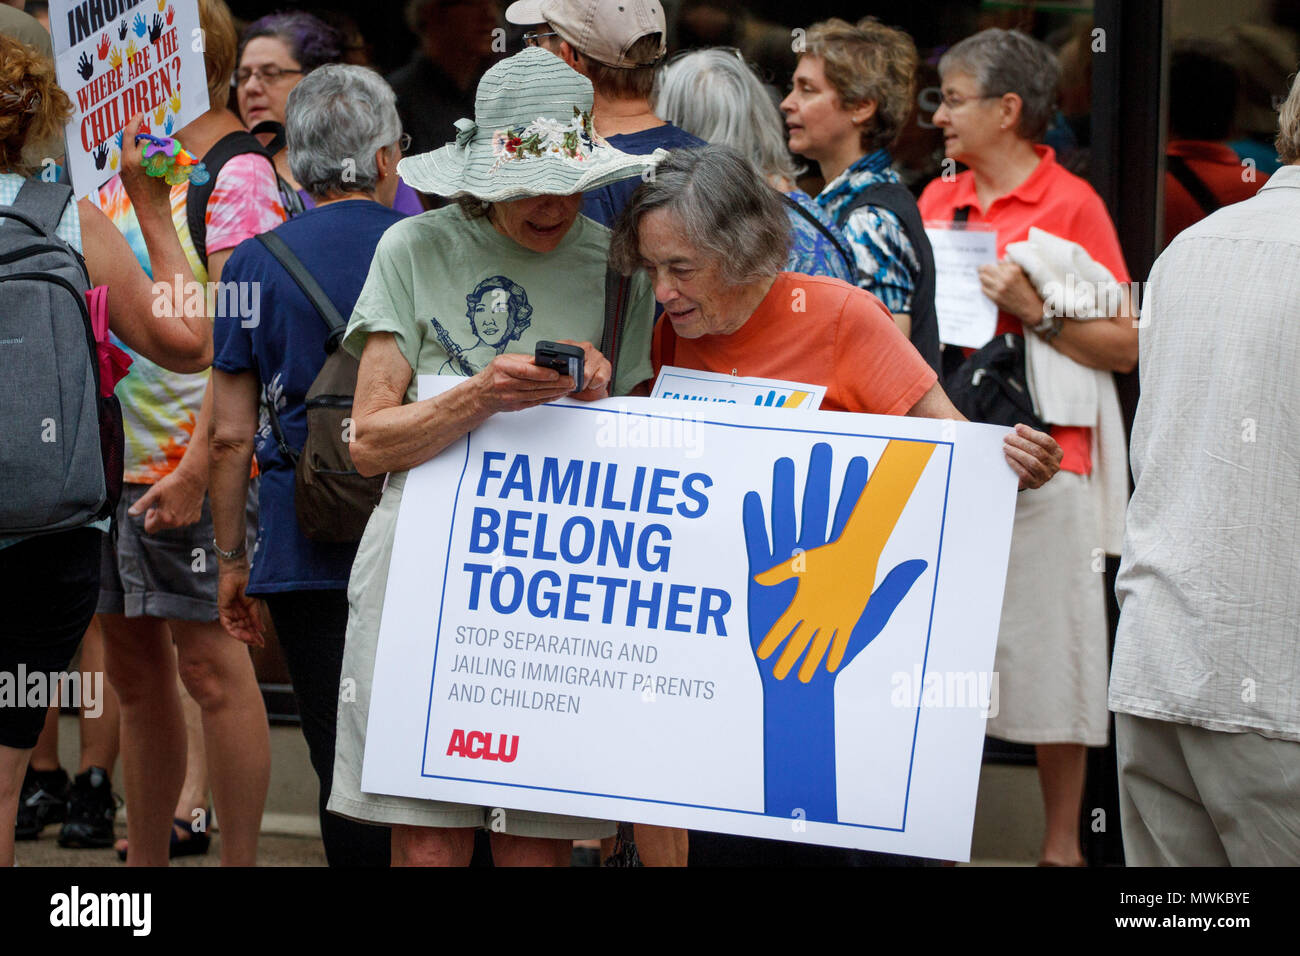 Philadelphia, United States. 01st June, 2018. Protestors hold a sign at a rally near the city's ICE (Immigration and Customs Enforcement) office, organized by the ACLU in opposition to new Trump administration policies which separate children entering the country from their parents or accompanying family members. Credit: Michael Candelori/Pacific Press/Alamy Live News Stock Photo